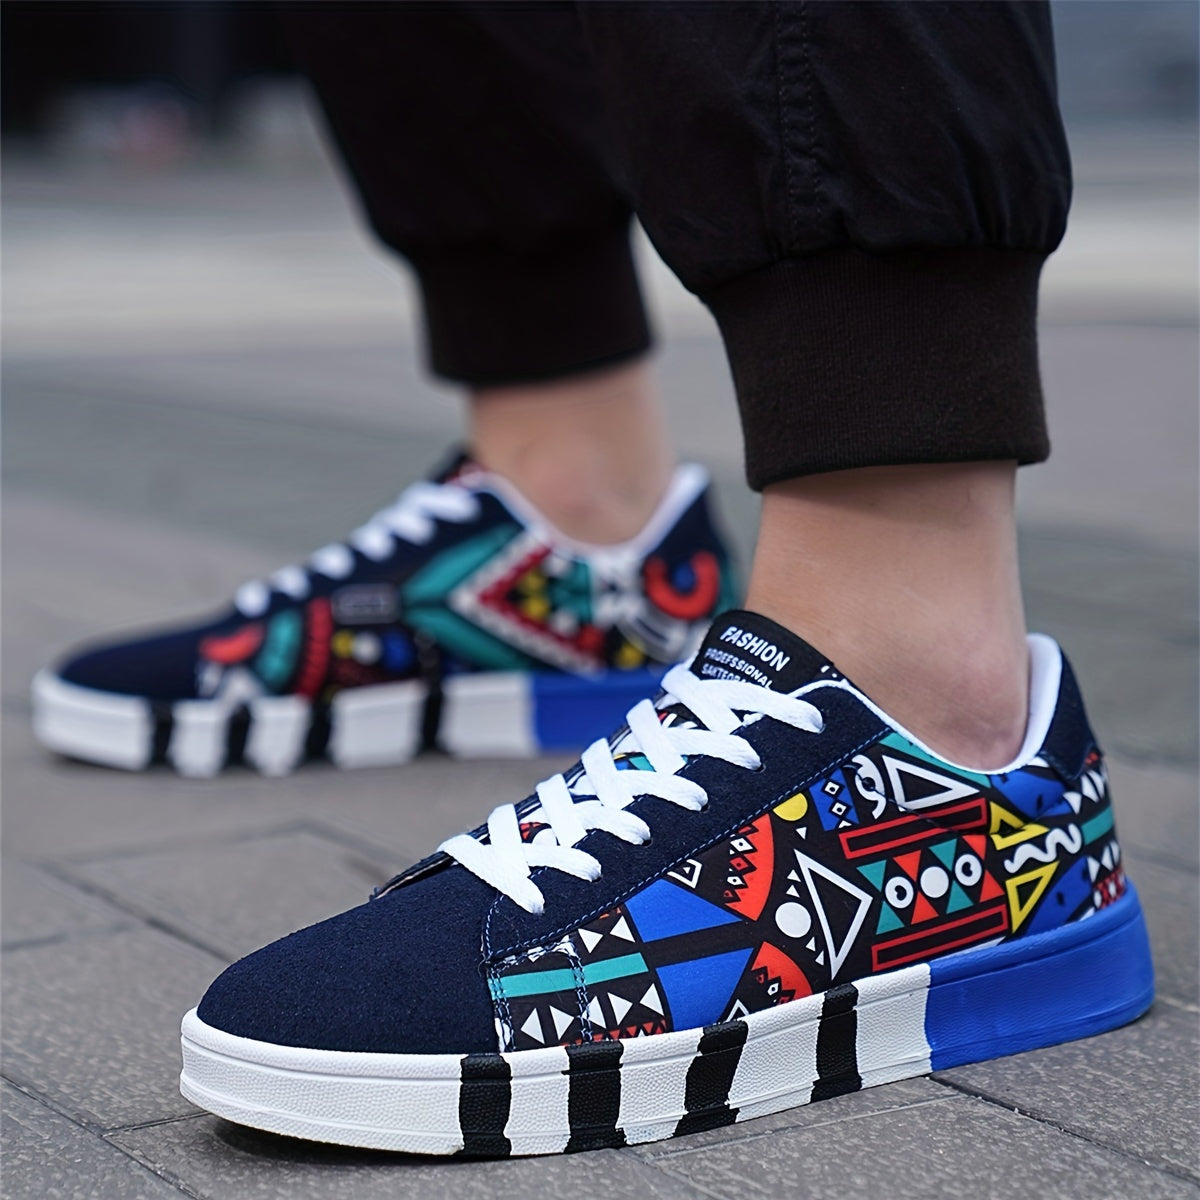 Men's Trendy Skate Shoes, Comfy Non Slip Casual Style Sneakers For Men's Outdoor Activities